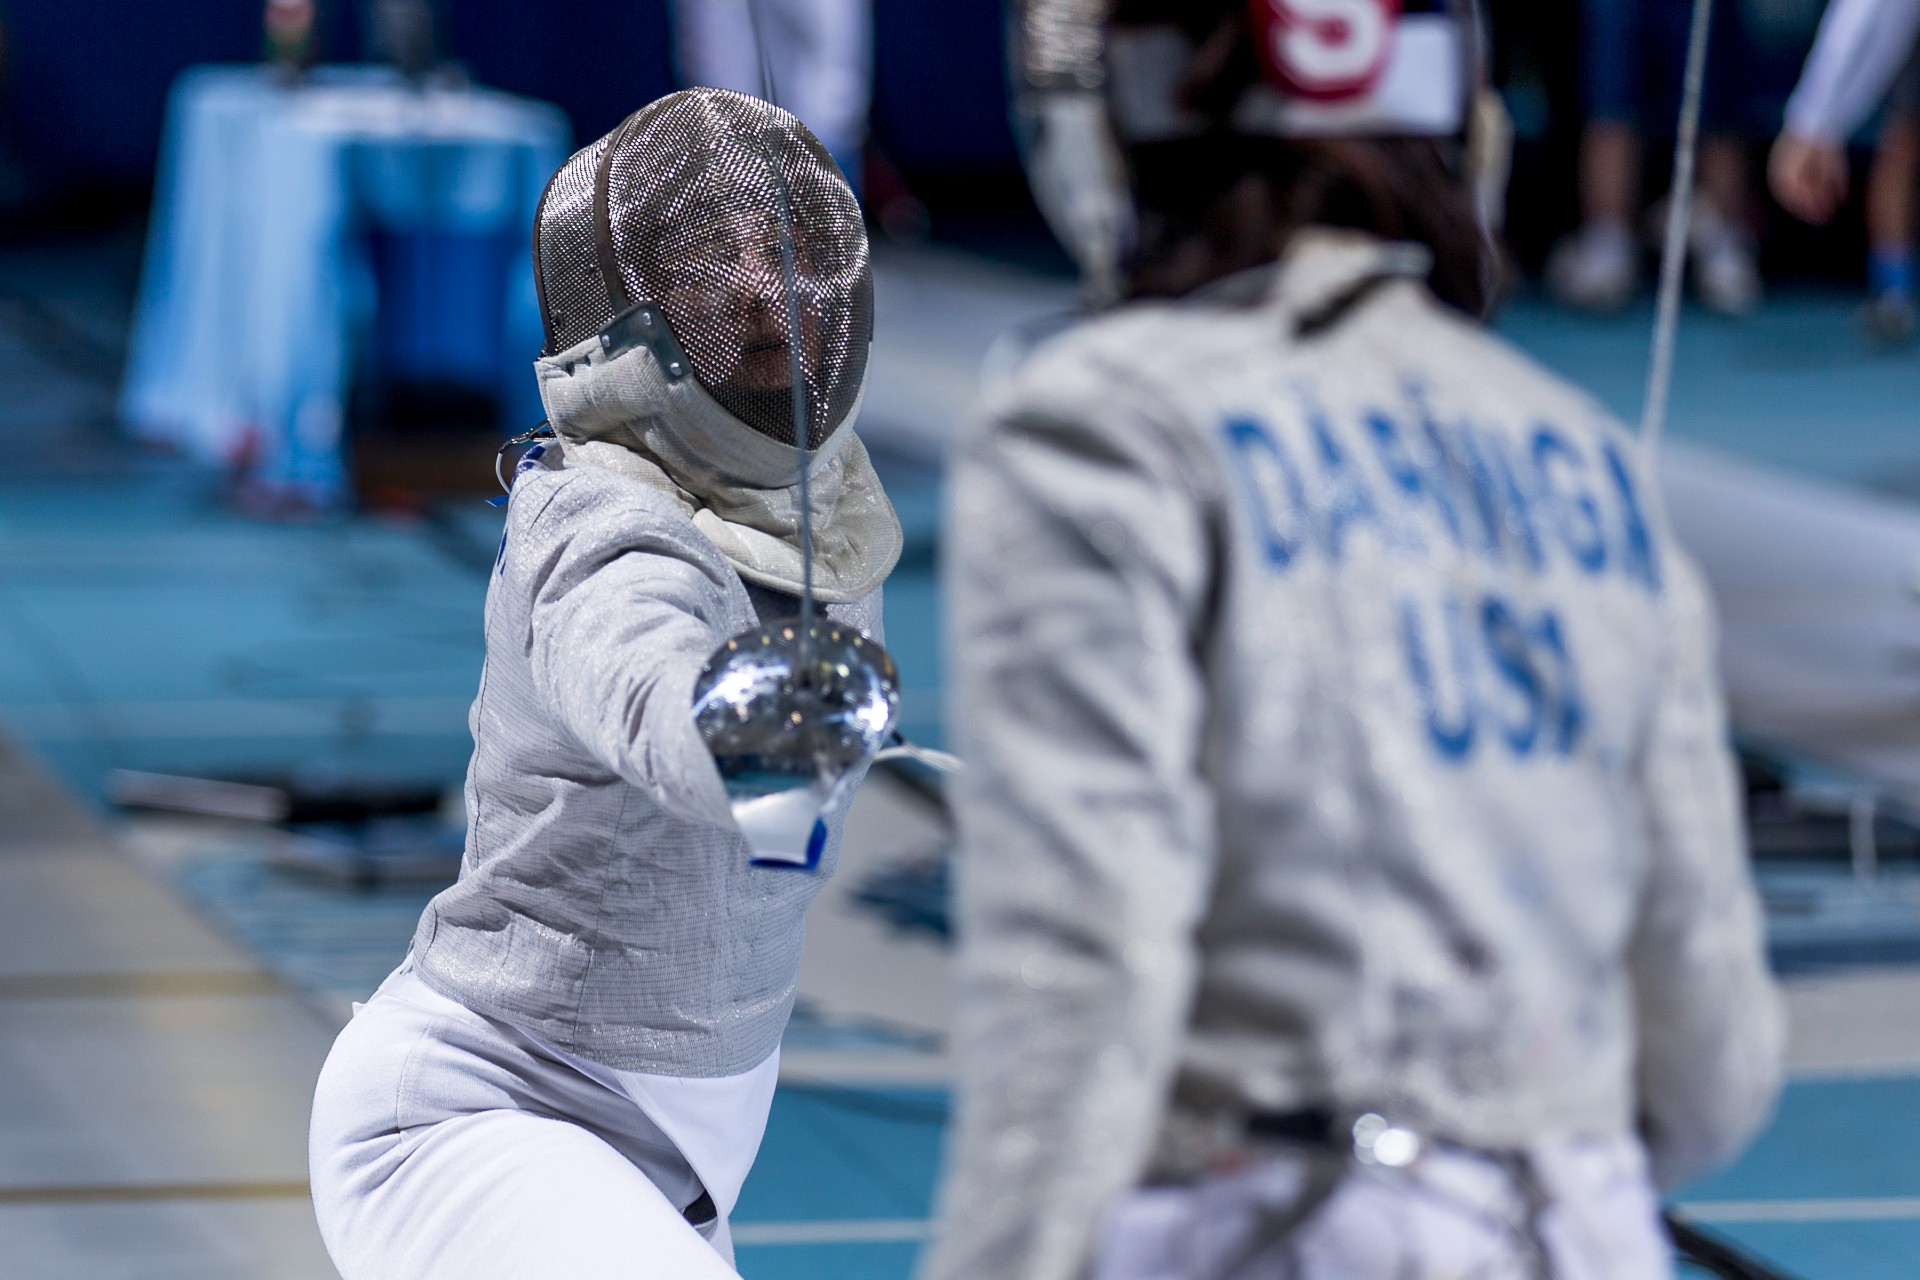 Weber in a fencing duel at Columbia’s Blue Gym in the Dodge Fitness Center, November 2022